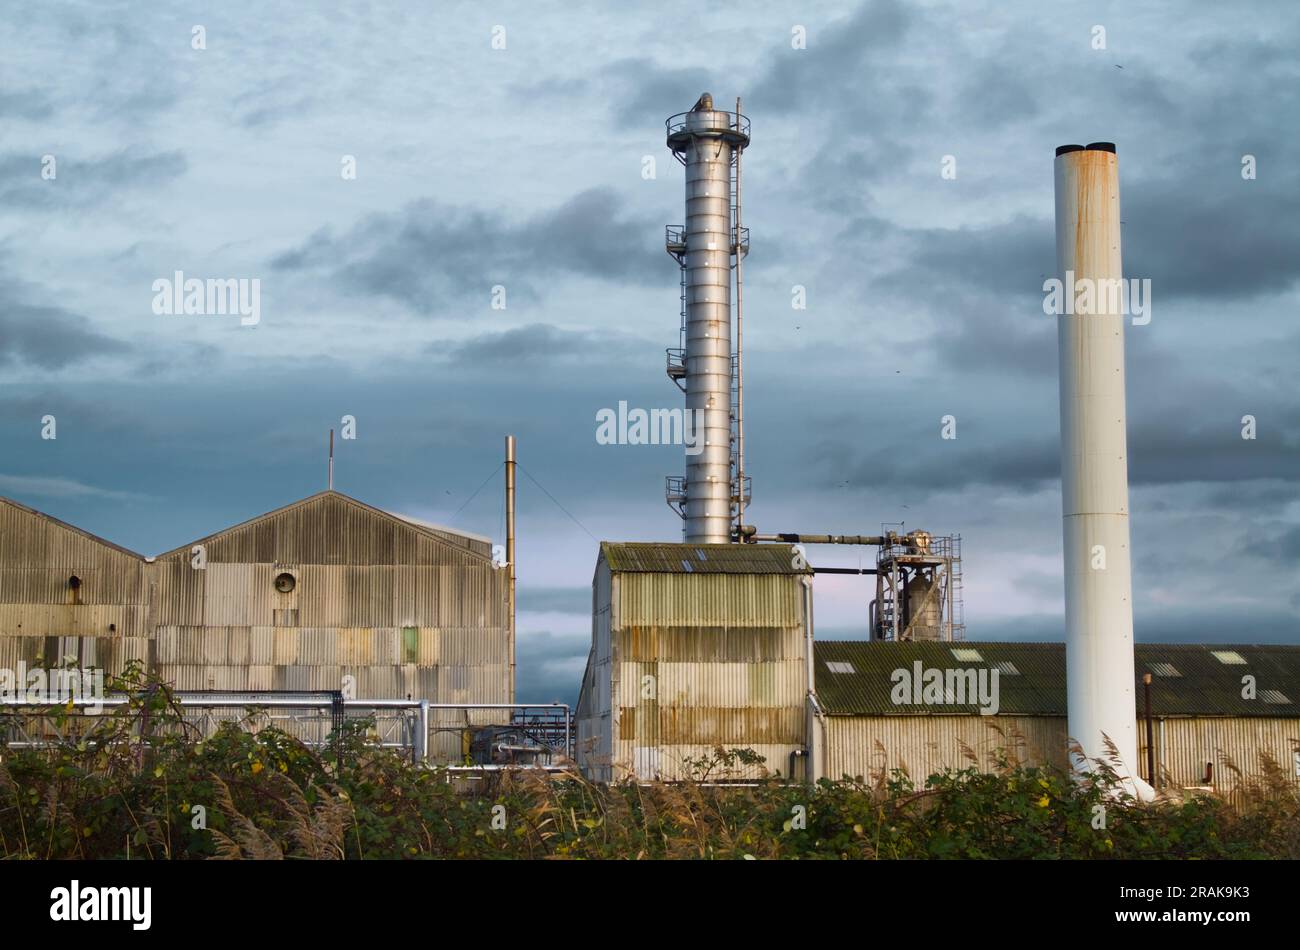 Industrial Site With Smokestacks, Chimneys And Corrugated Clad Buildings Of PIL Membranes Ltd, Kings Lynn England UK Stock Photo